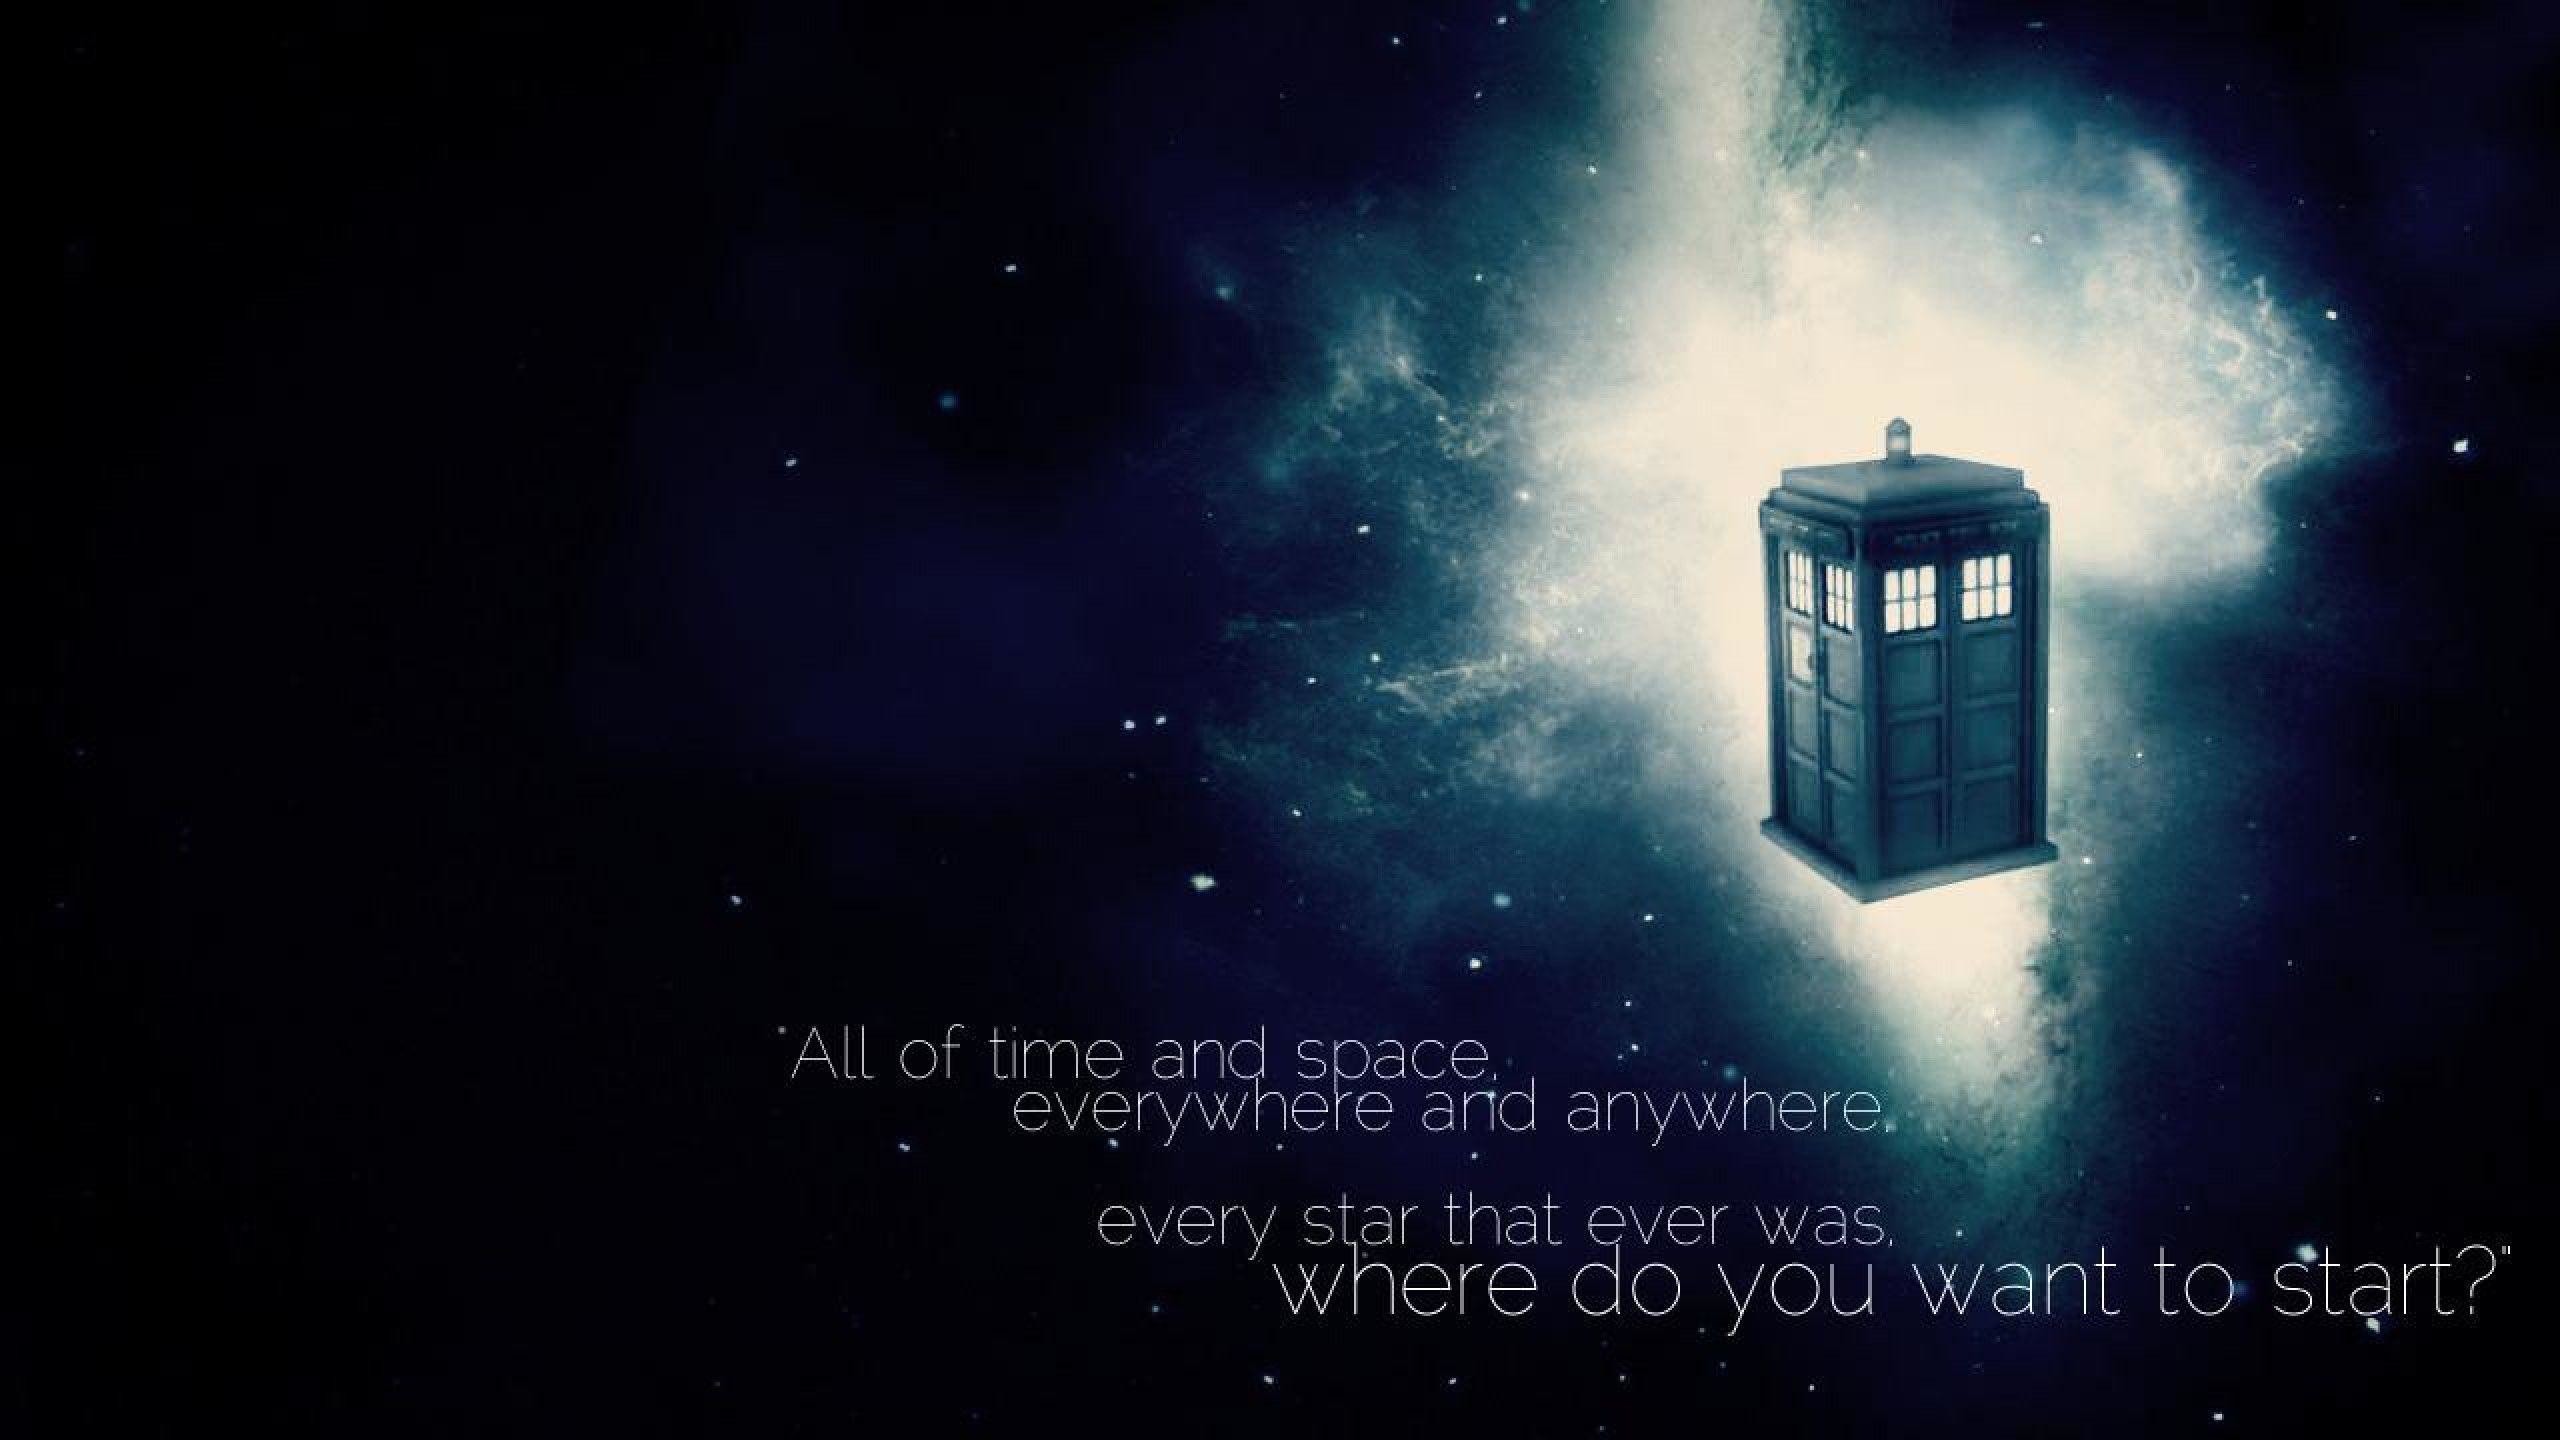 Doctor who ipad movie picture doctor who wallpaper doctor